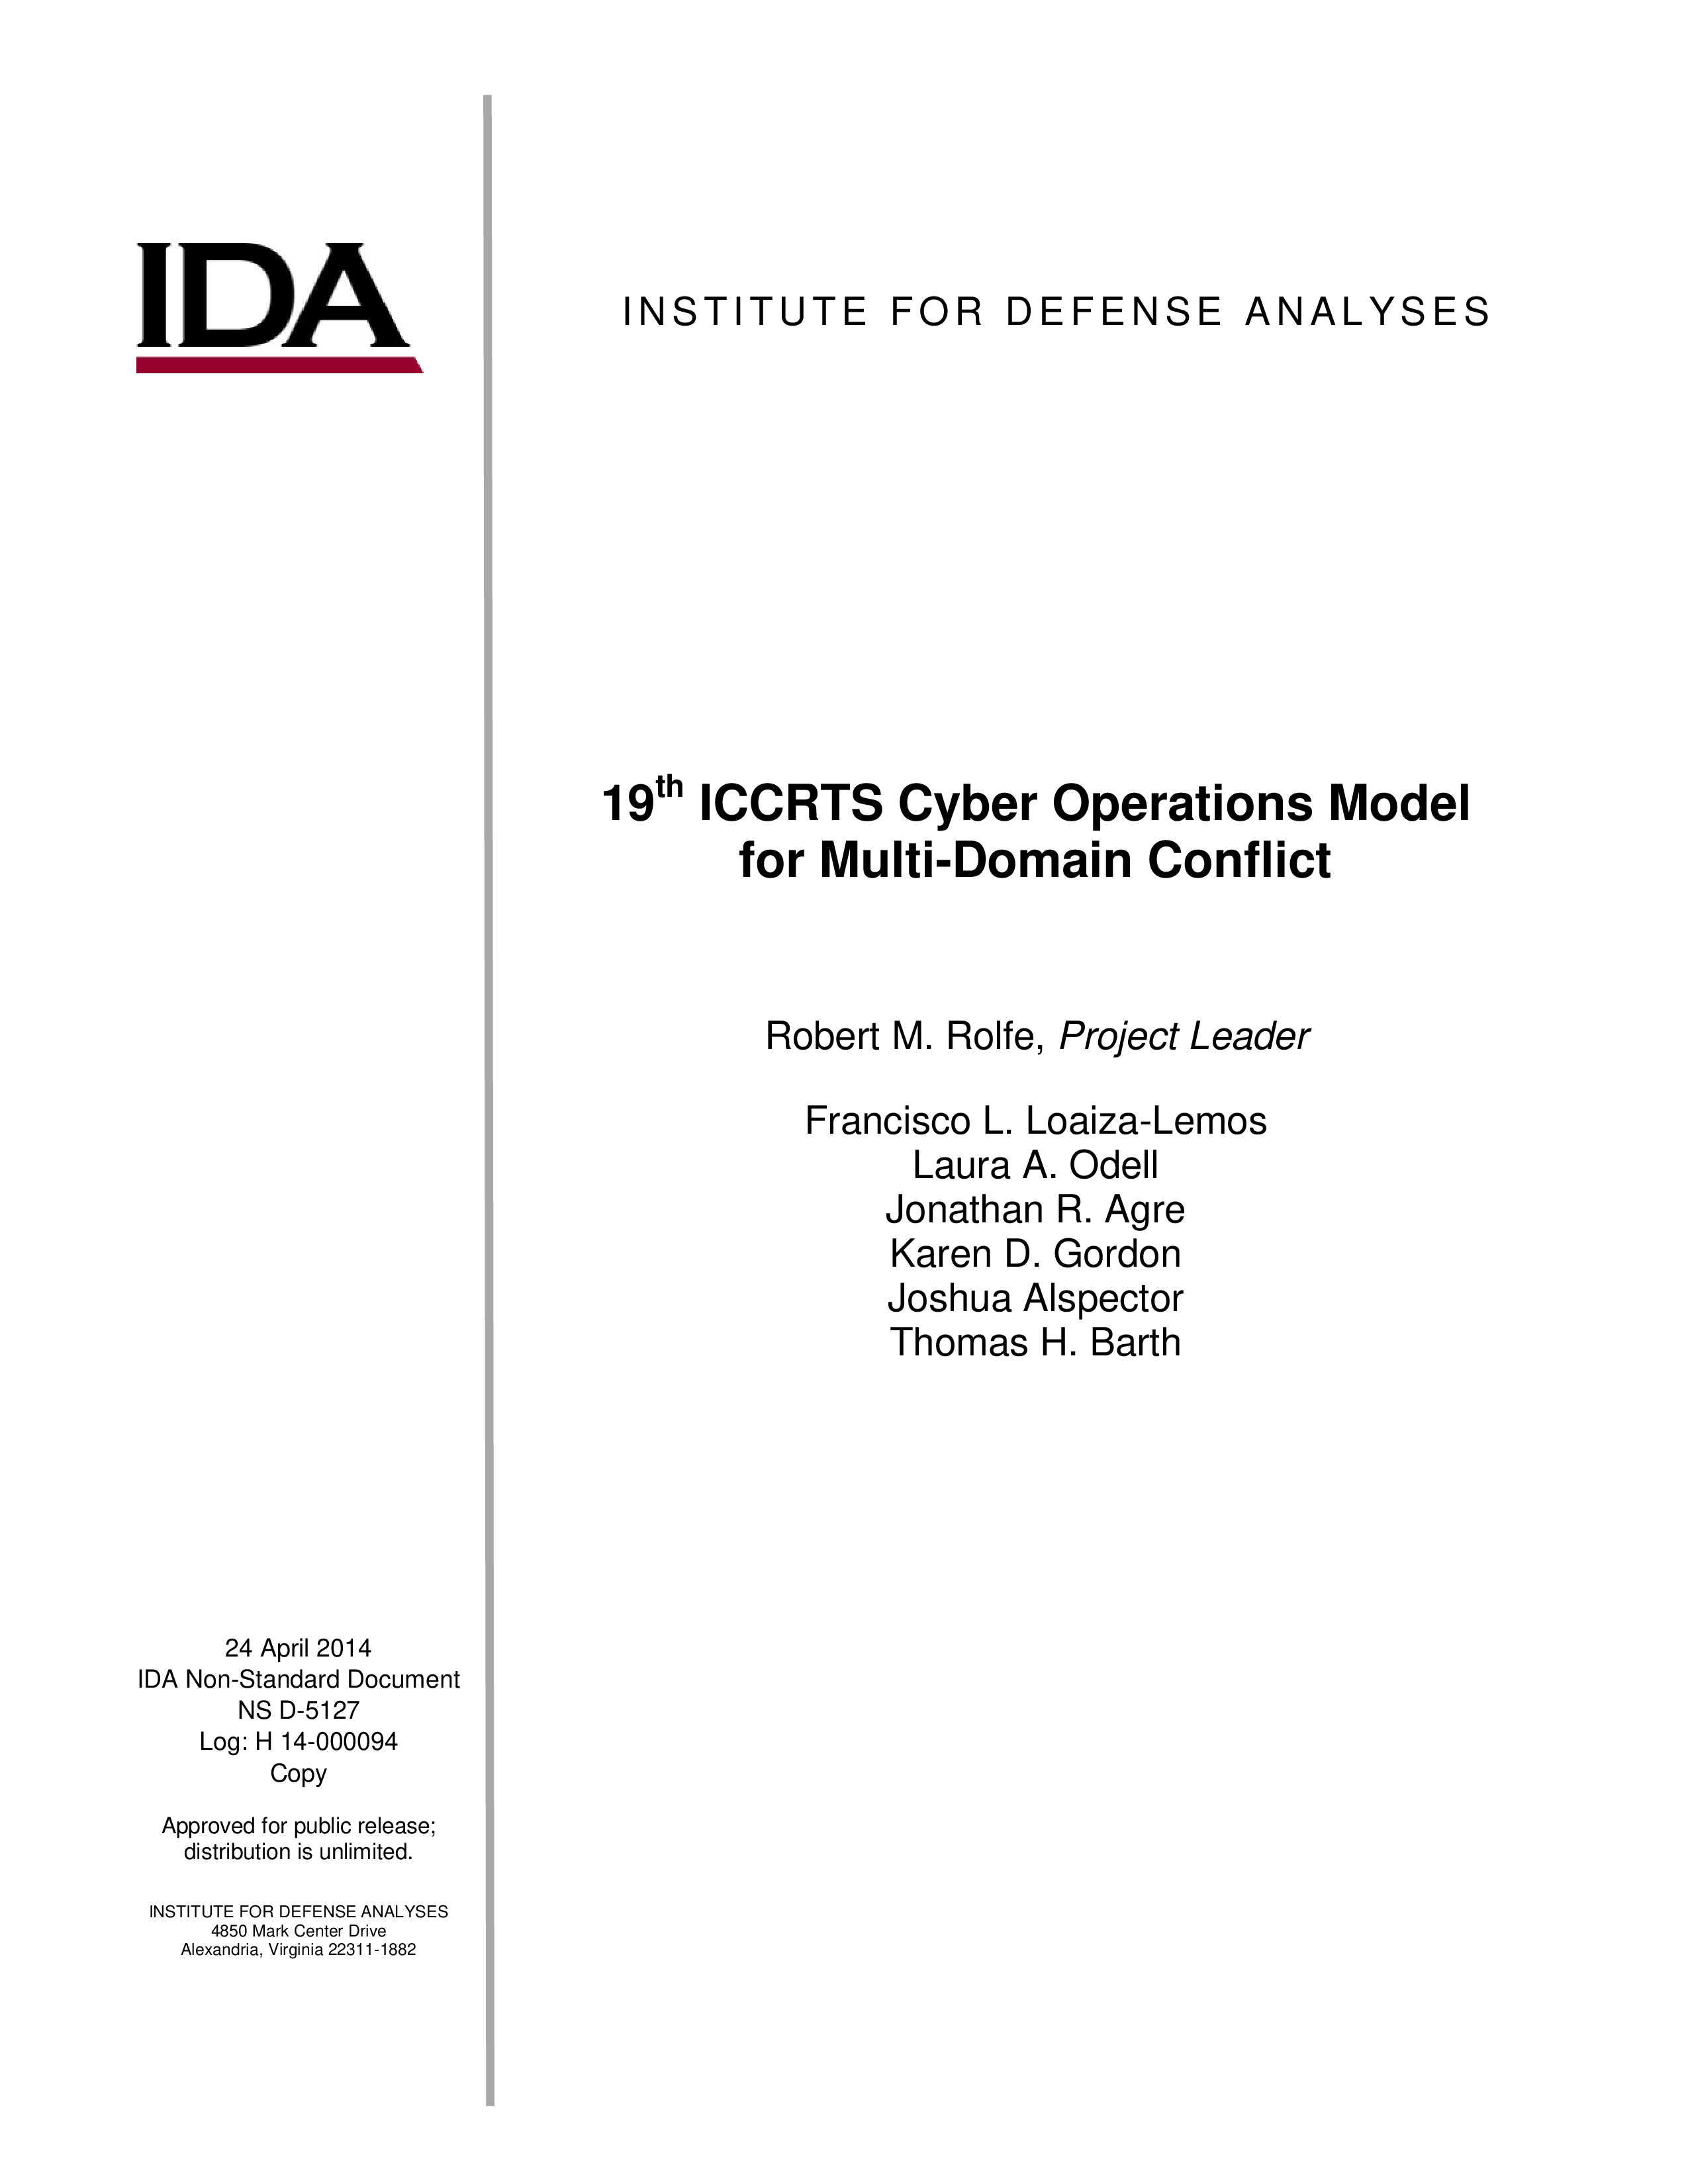 19th ICCRTS Cyber Operations Model for Multi-Domain Conflict